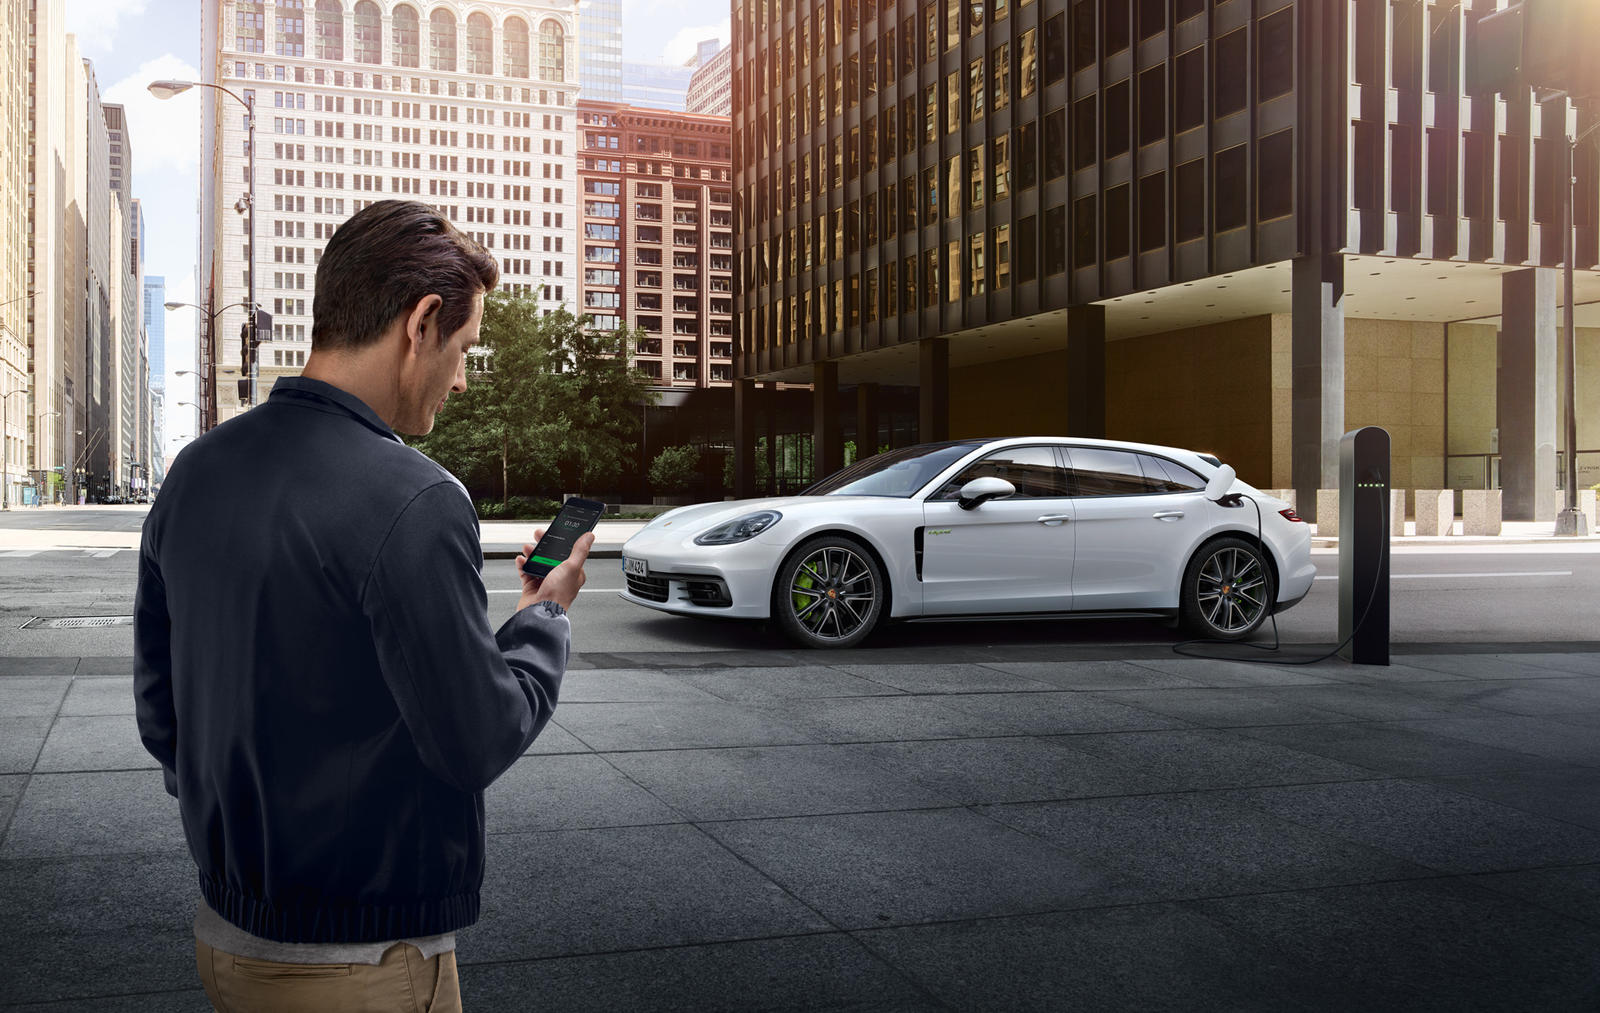 digital_charging_service_for_electric_vehicles_2018_porsche_ag